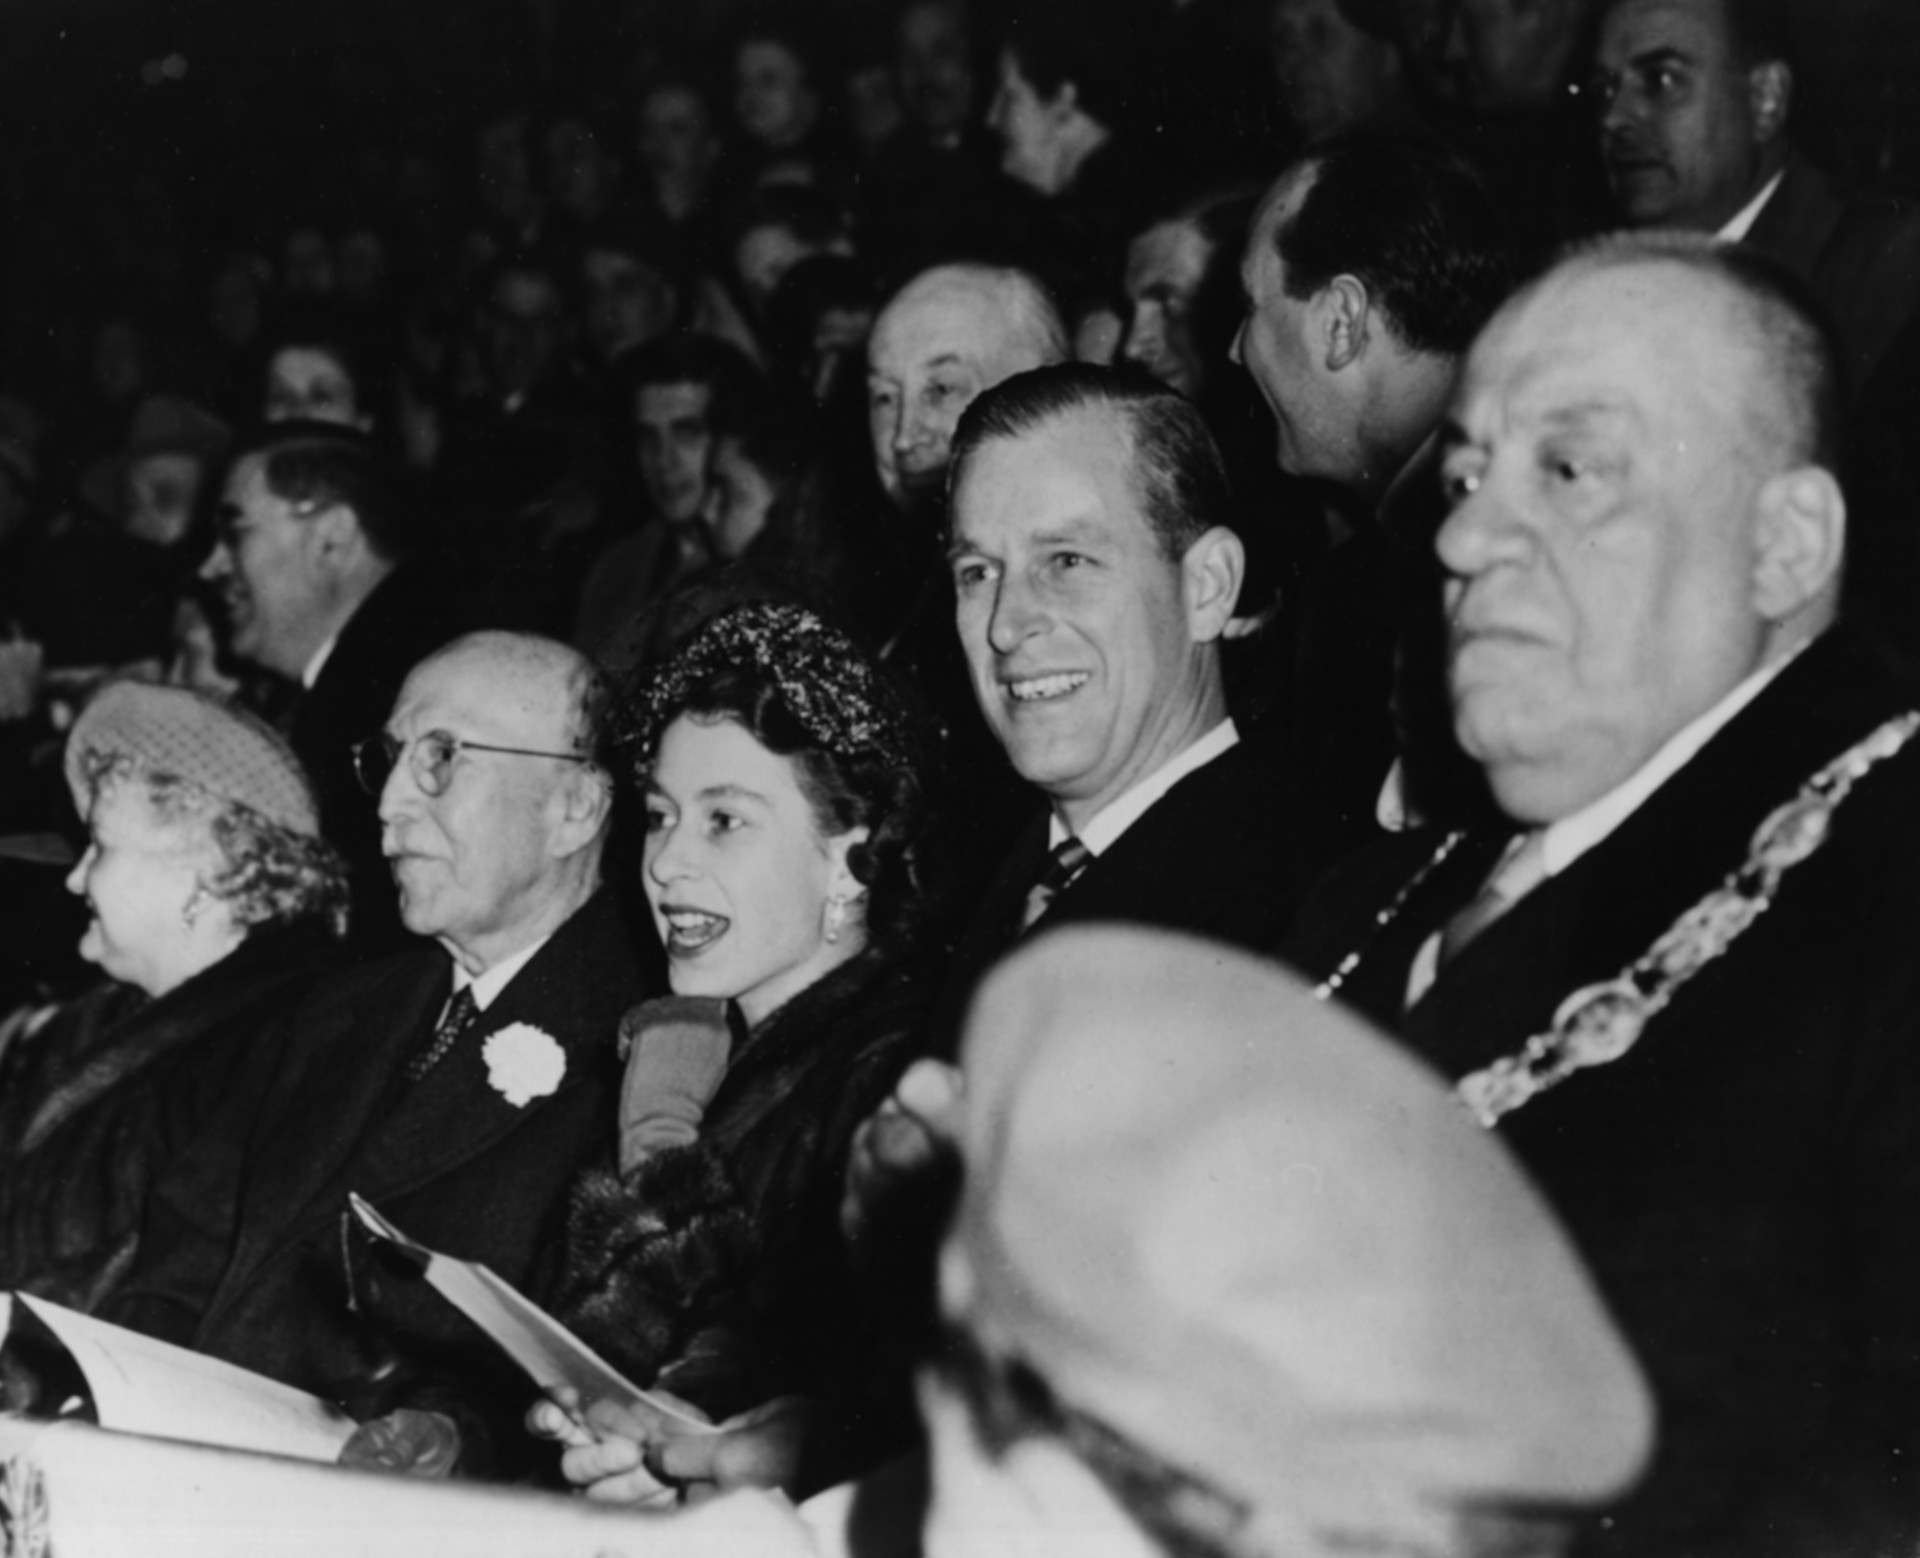 Princess Elizabeth and Prince Philip watch an ice hockey game with Mayor Camillien Houde in Montreal.<p>You may also like:<a href="https://www.starsinsider.com/n/426175?utm_source=msn.com&utm_medium=display&utm_campaign=referral_description&utm_content=705778en-za"> Gal Gadot and other celebs react to the coronavirus outbreak</a></p>